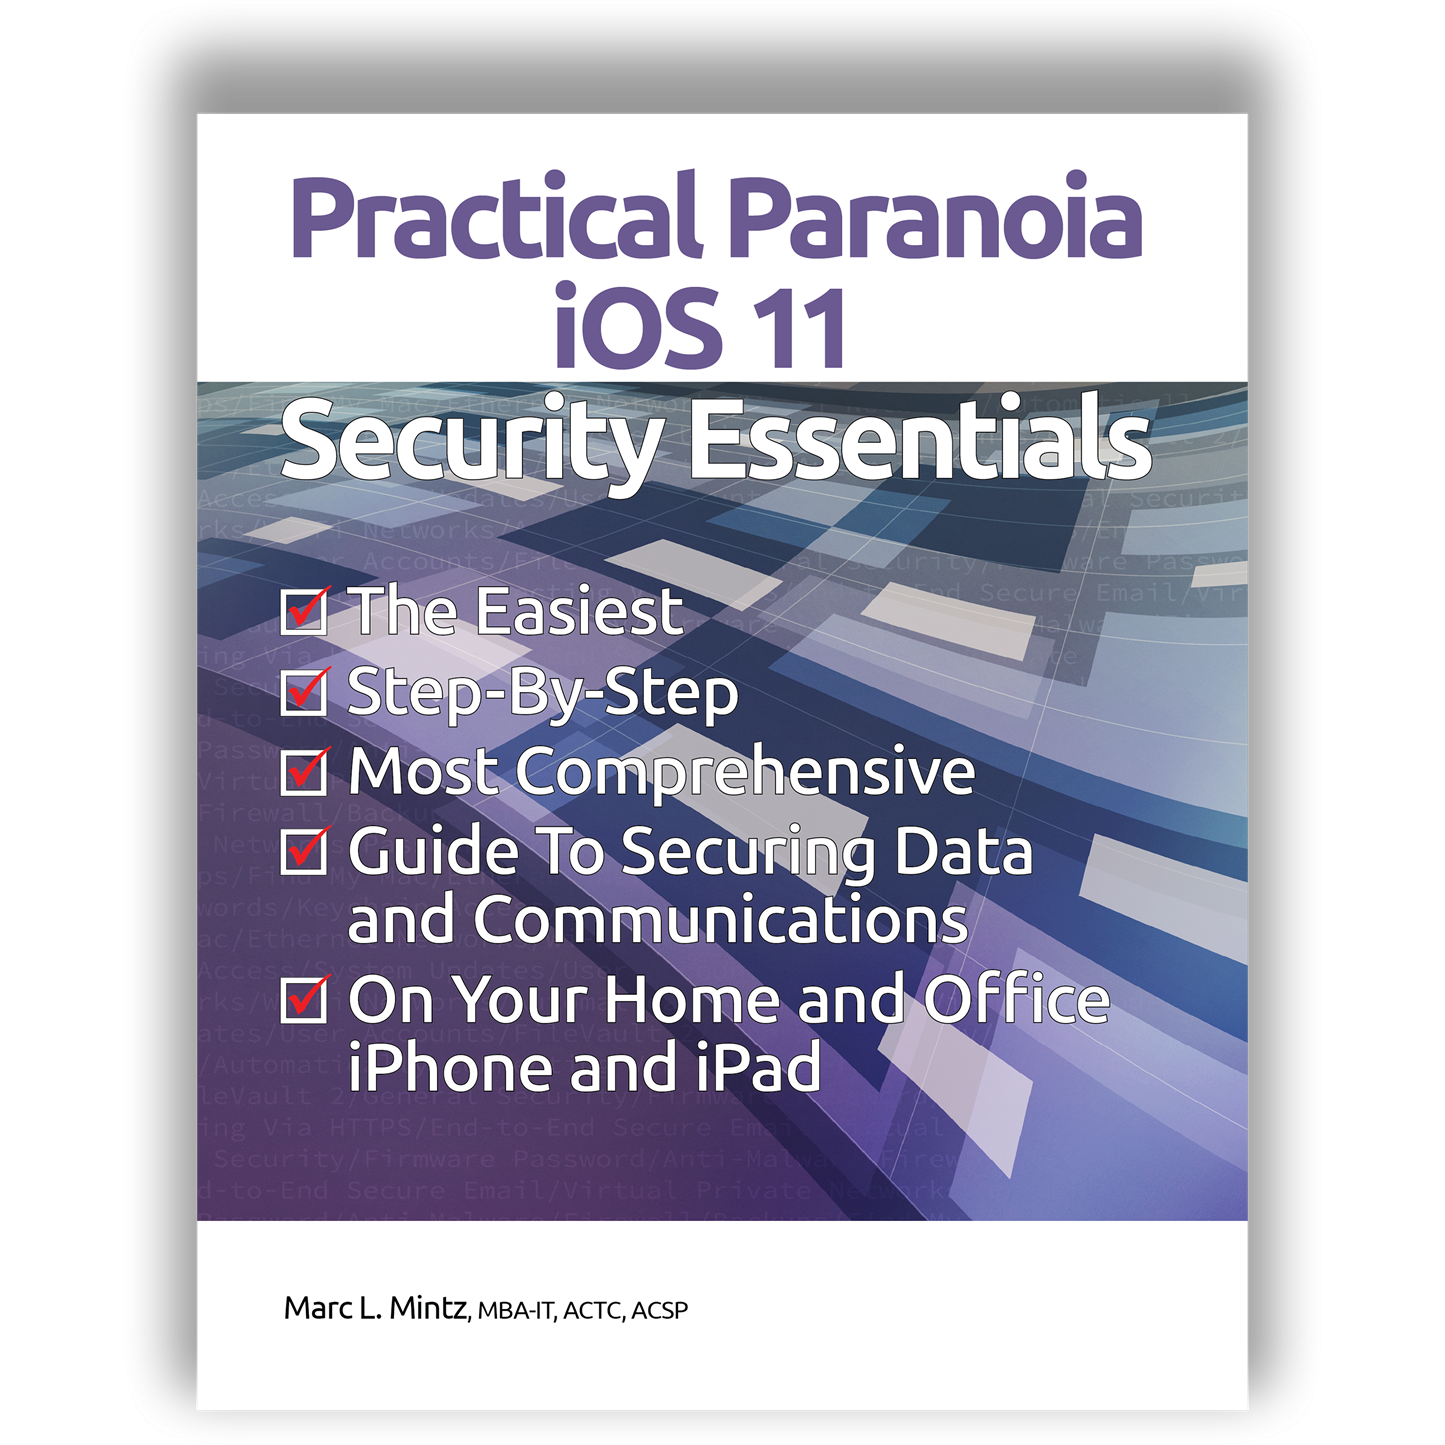 Practical Paranoia iOS 11 Update: Chapters 4, 13, 14, 15, 16, 20, 21